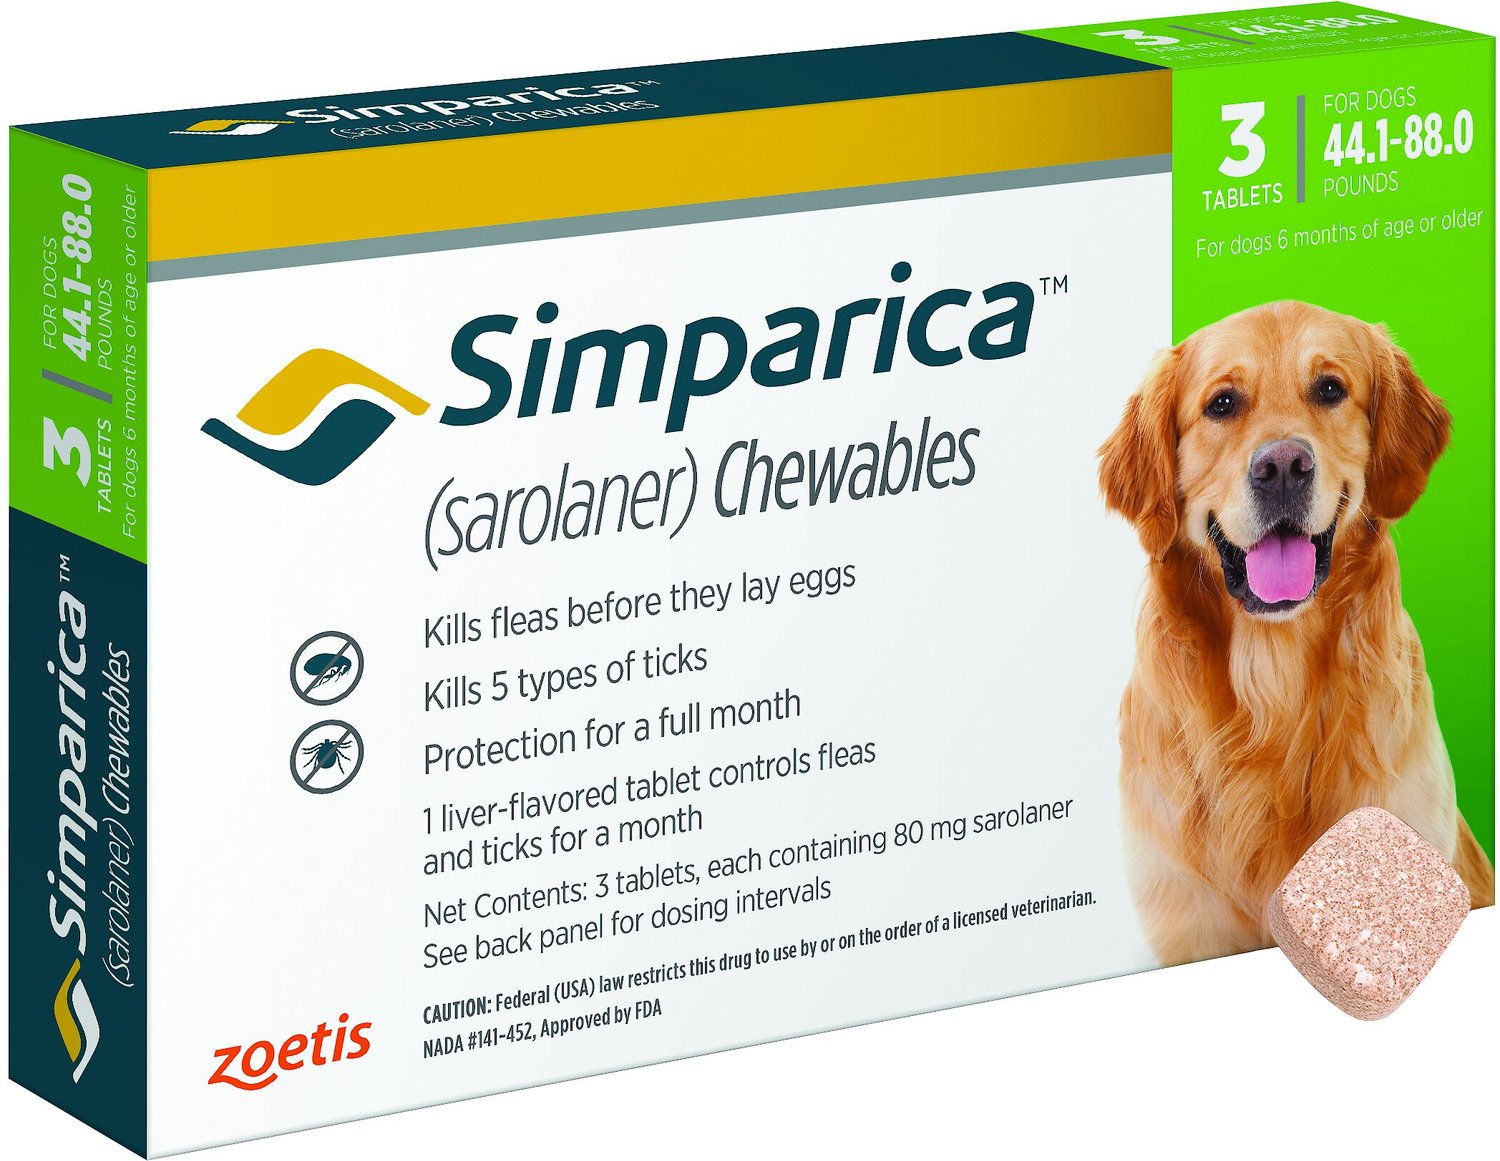 Simparica Chewable Tablets for Dogs, 44.188 lbs, 3 treatments